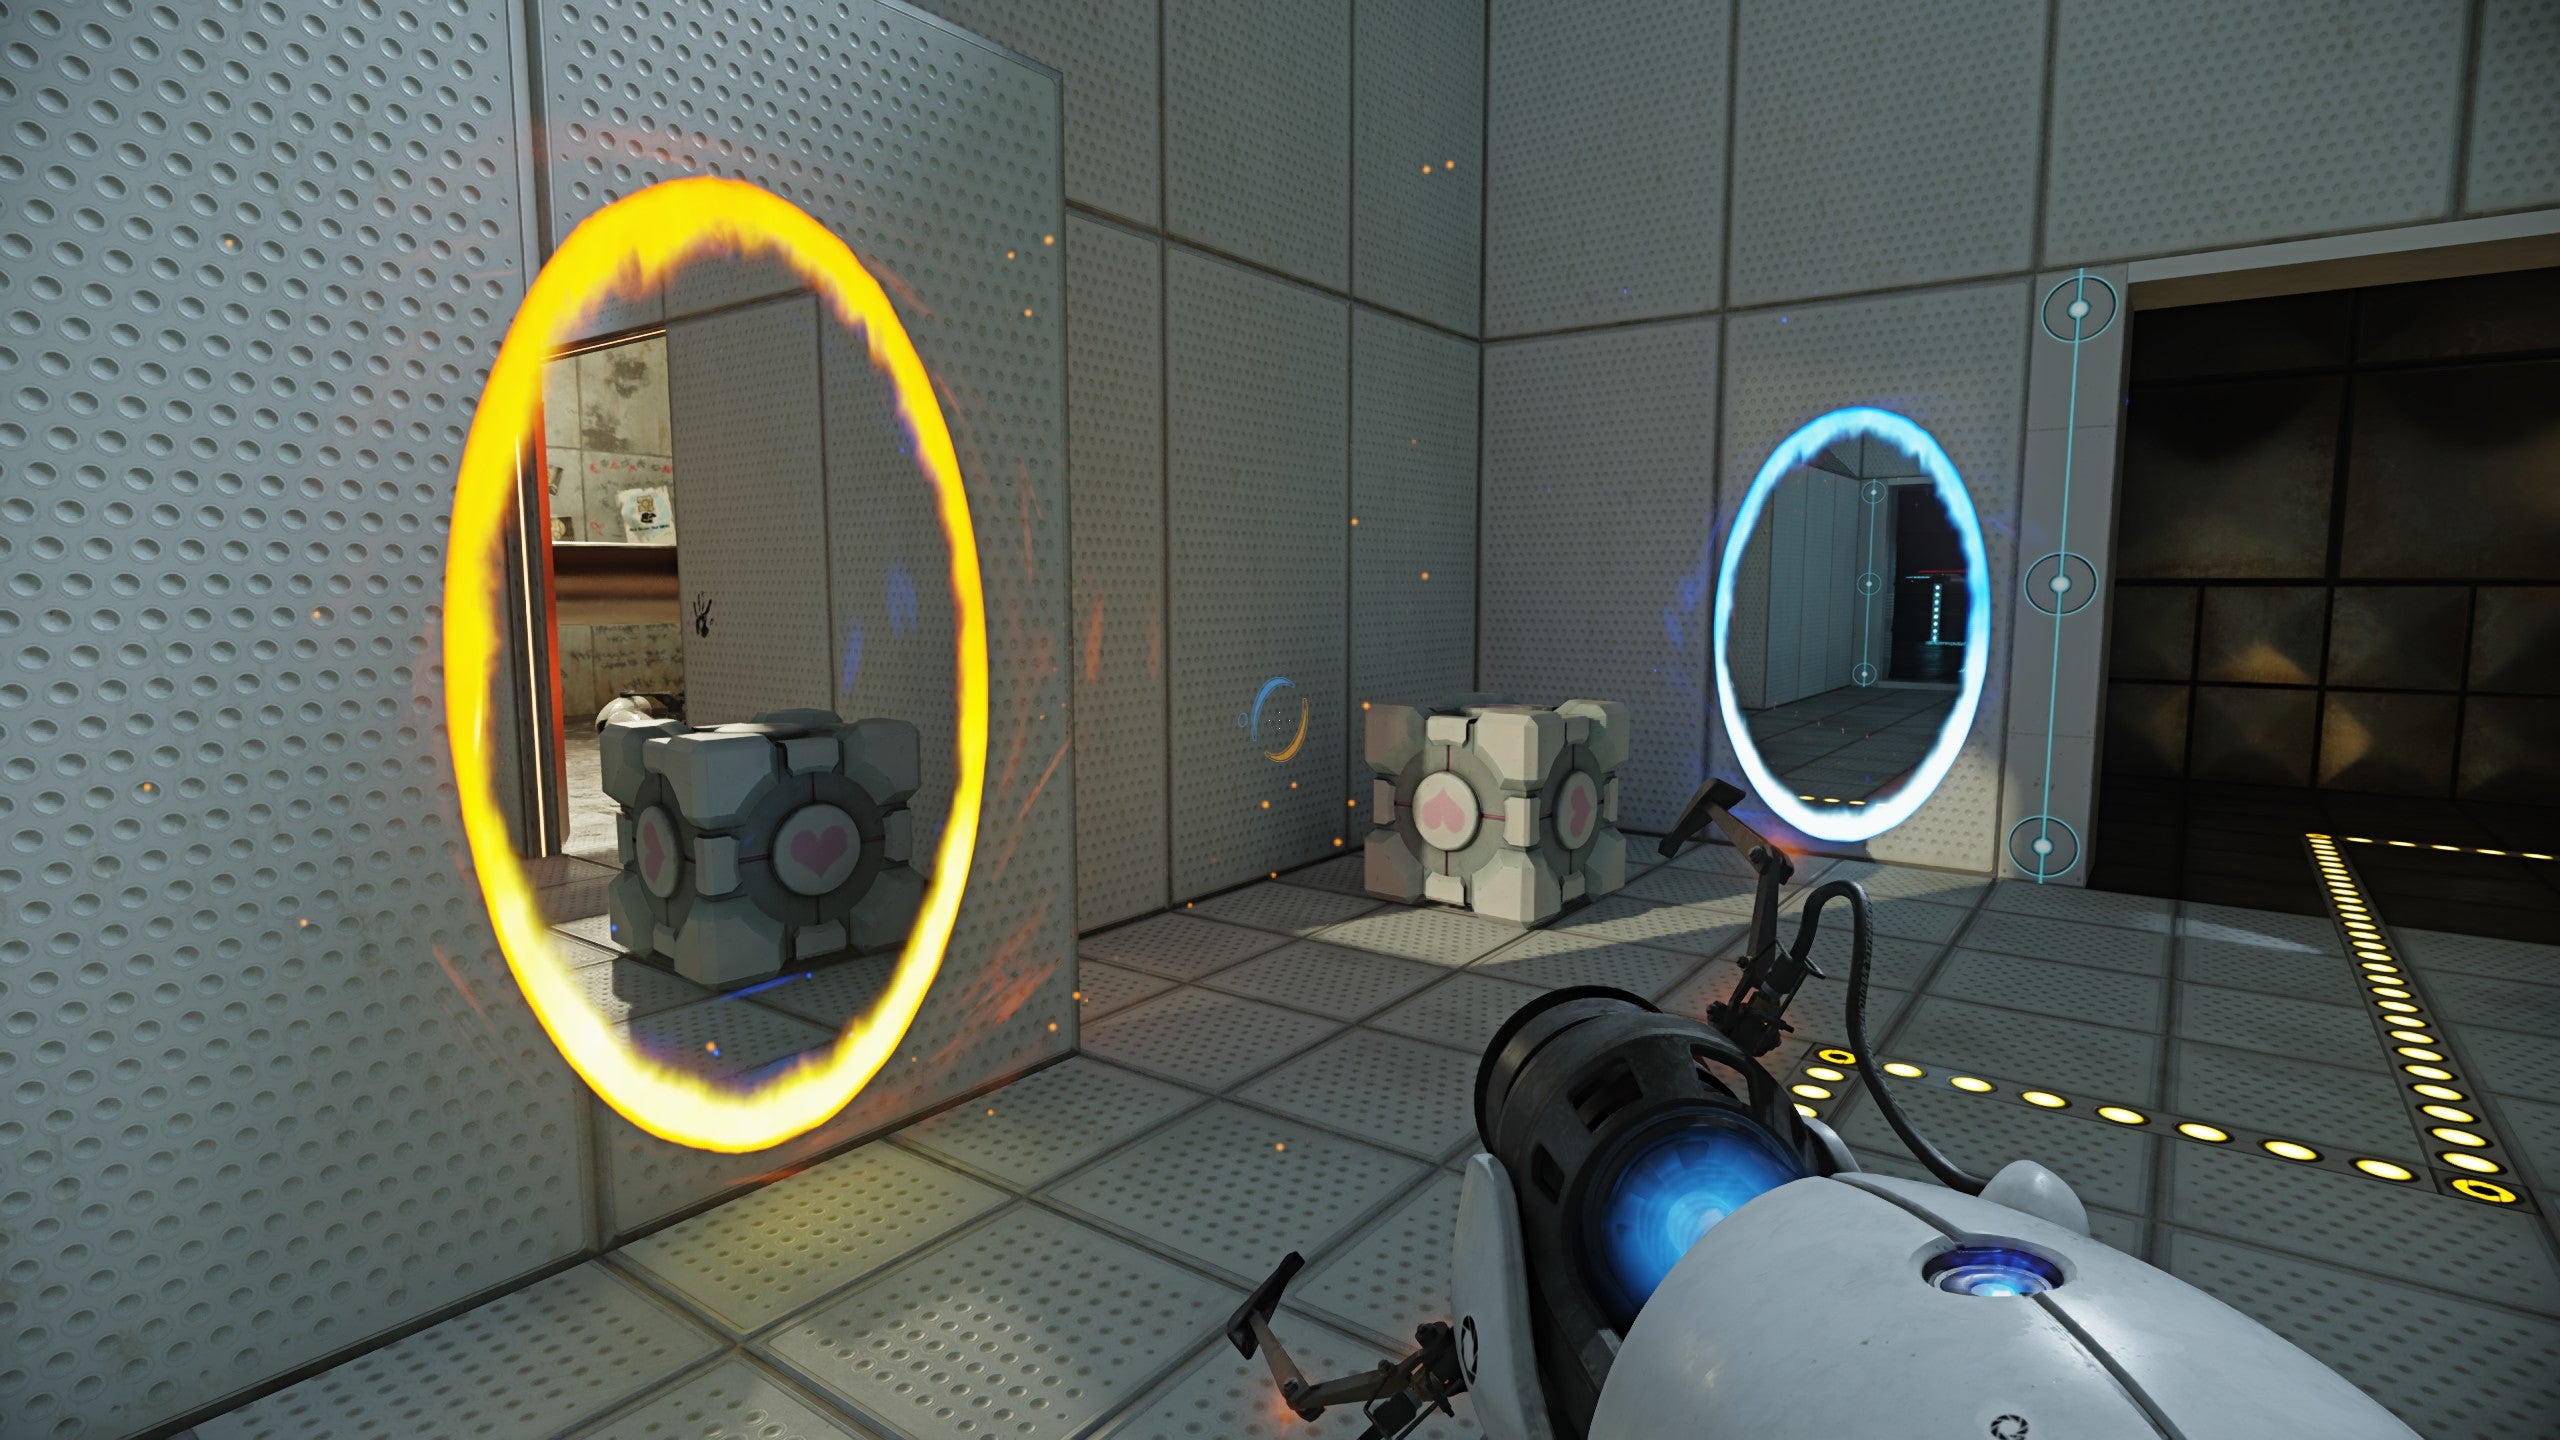 The Weighted Companion Cube sits between two portals in Portal with RTX.